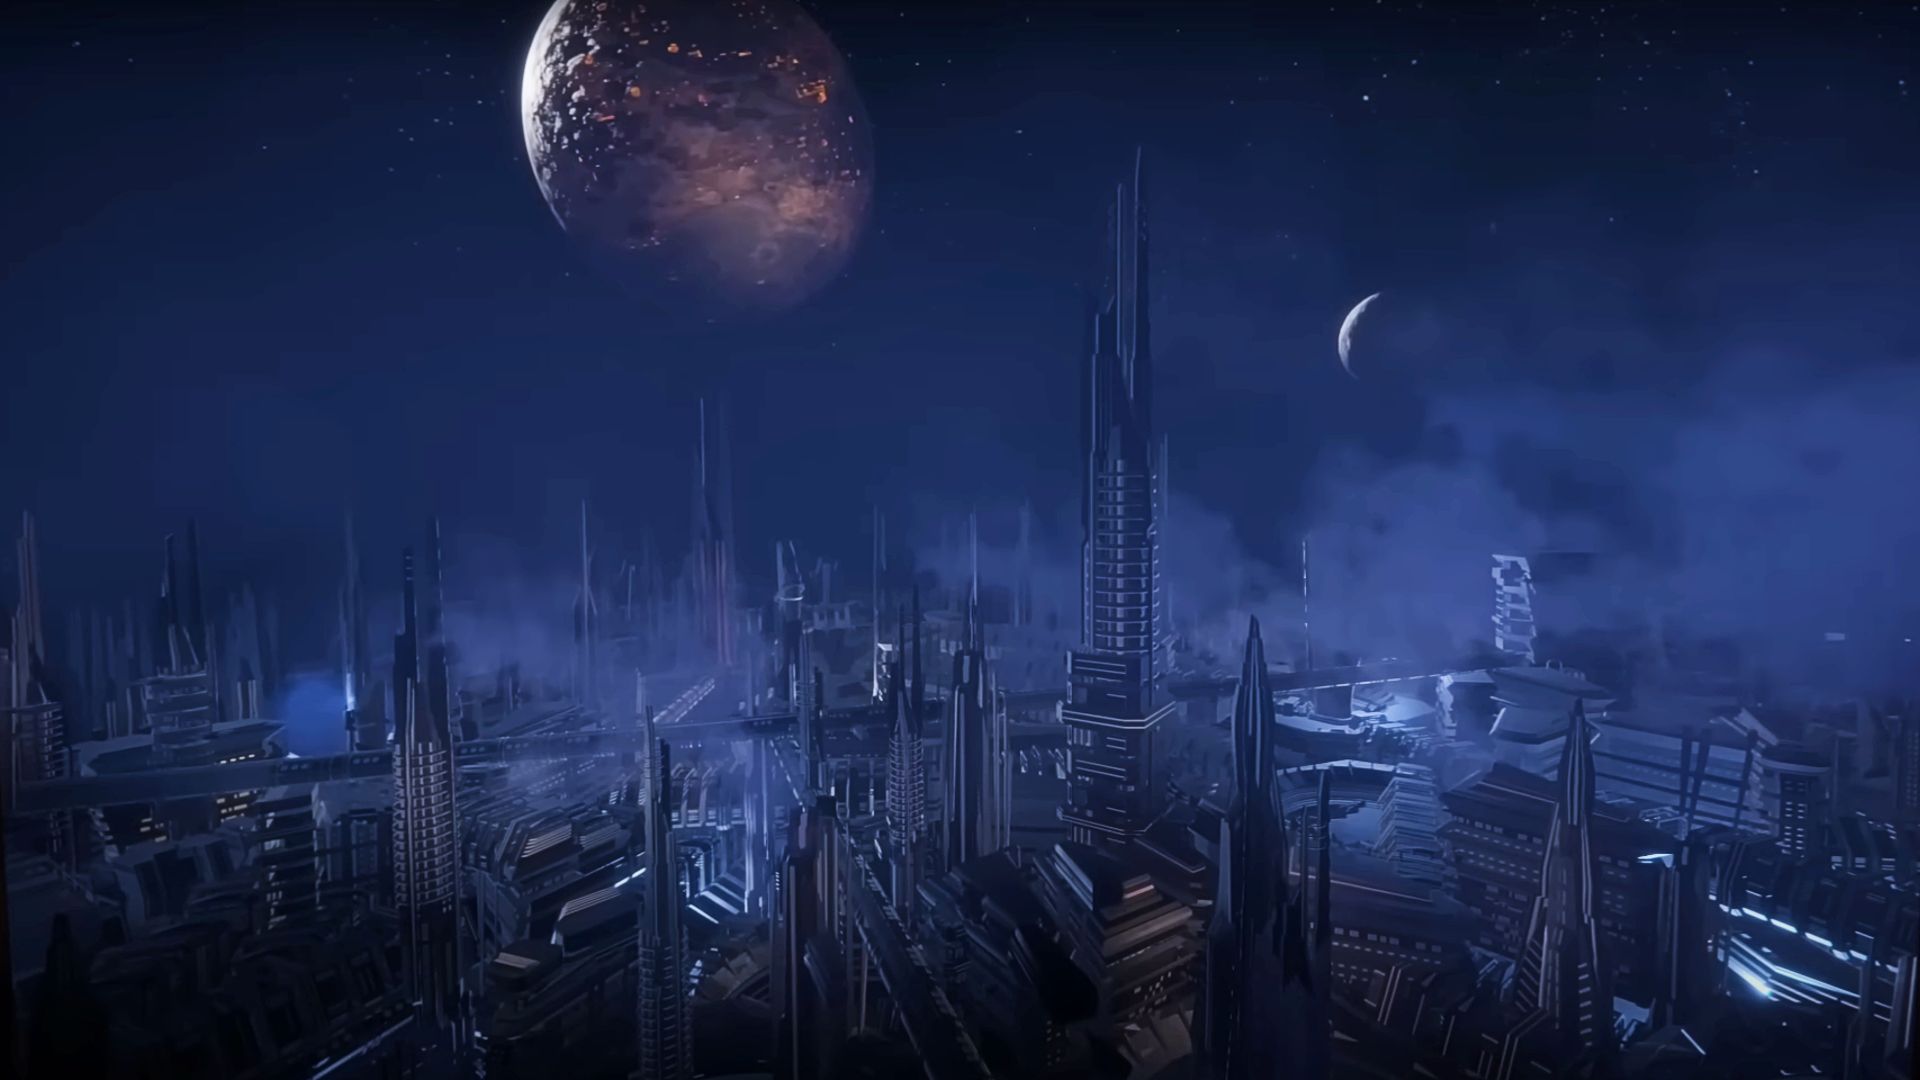 Sons of the Forest ending: The futuristic metropolis depicted in a vision within the cube artefact.